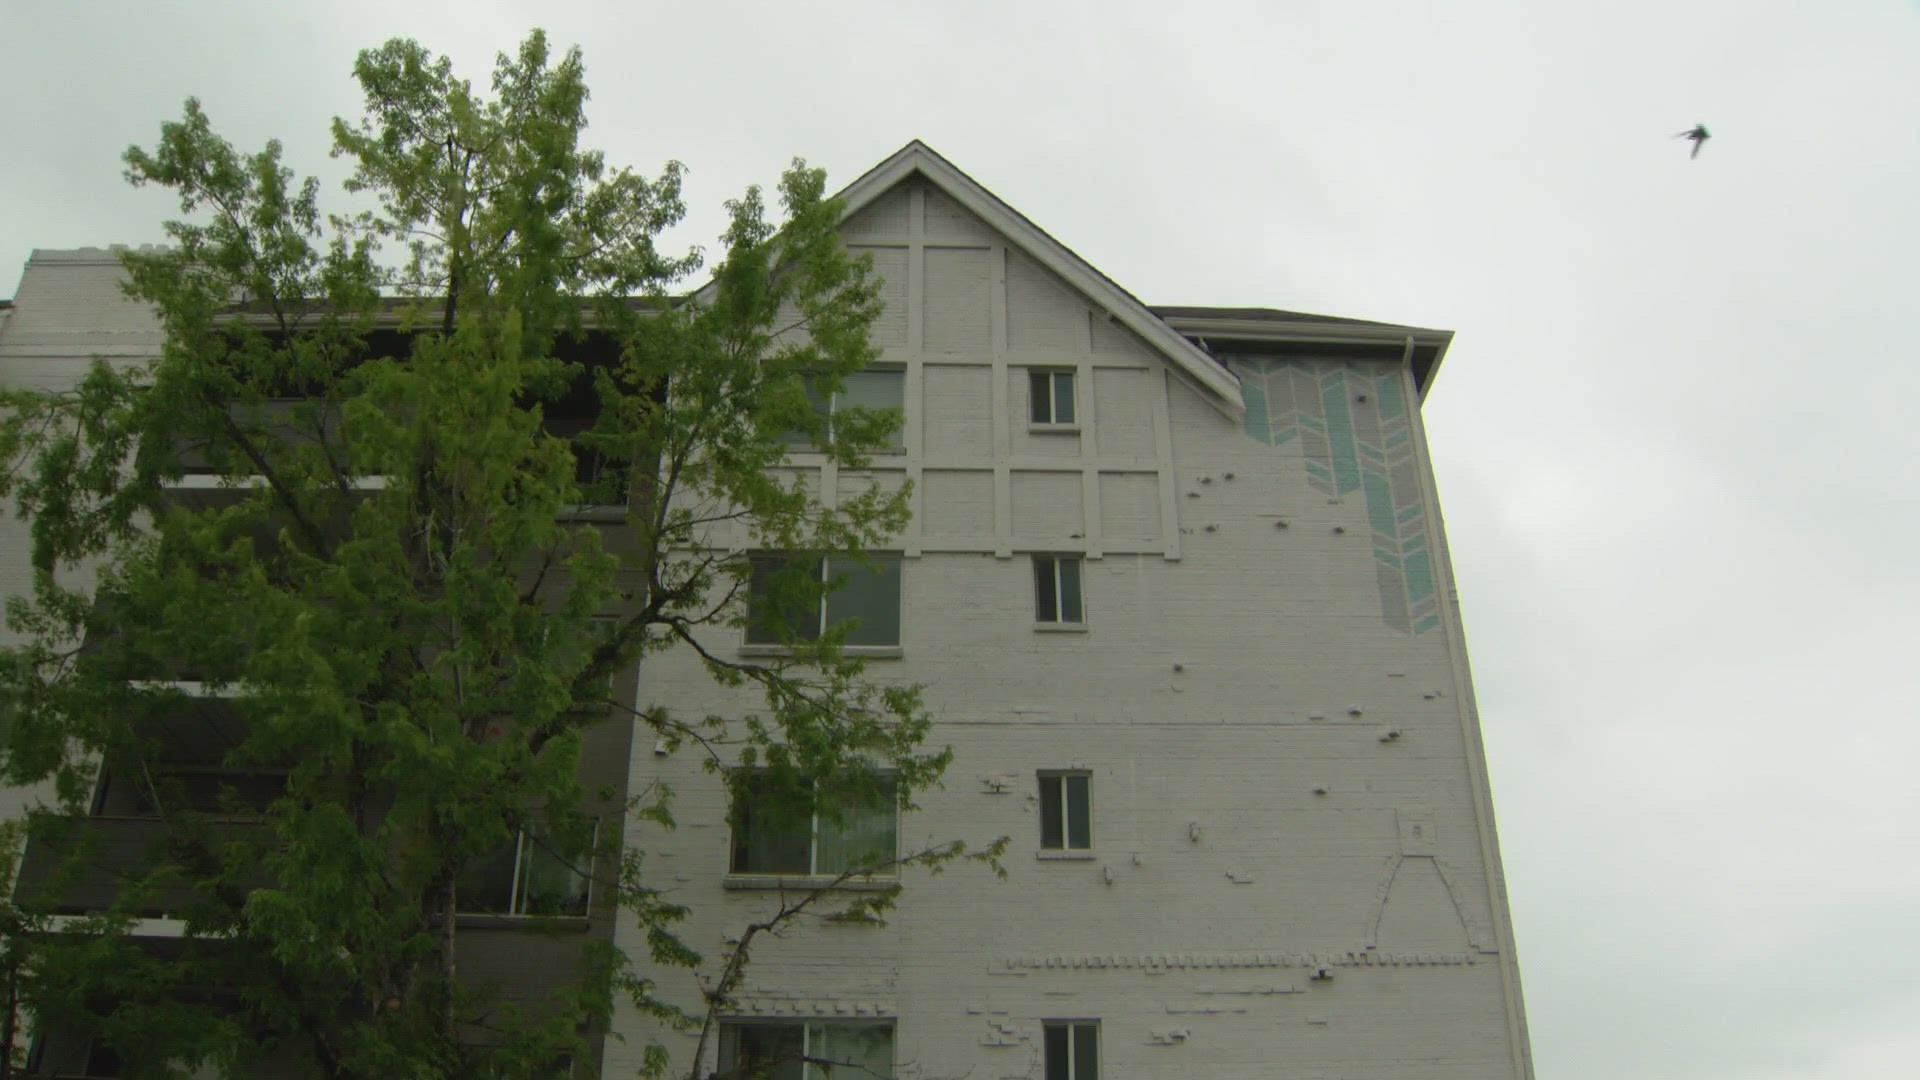 Four former tenants of an apartment complex in southeast Denver say it was operated like a slum.